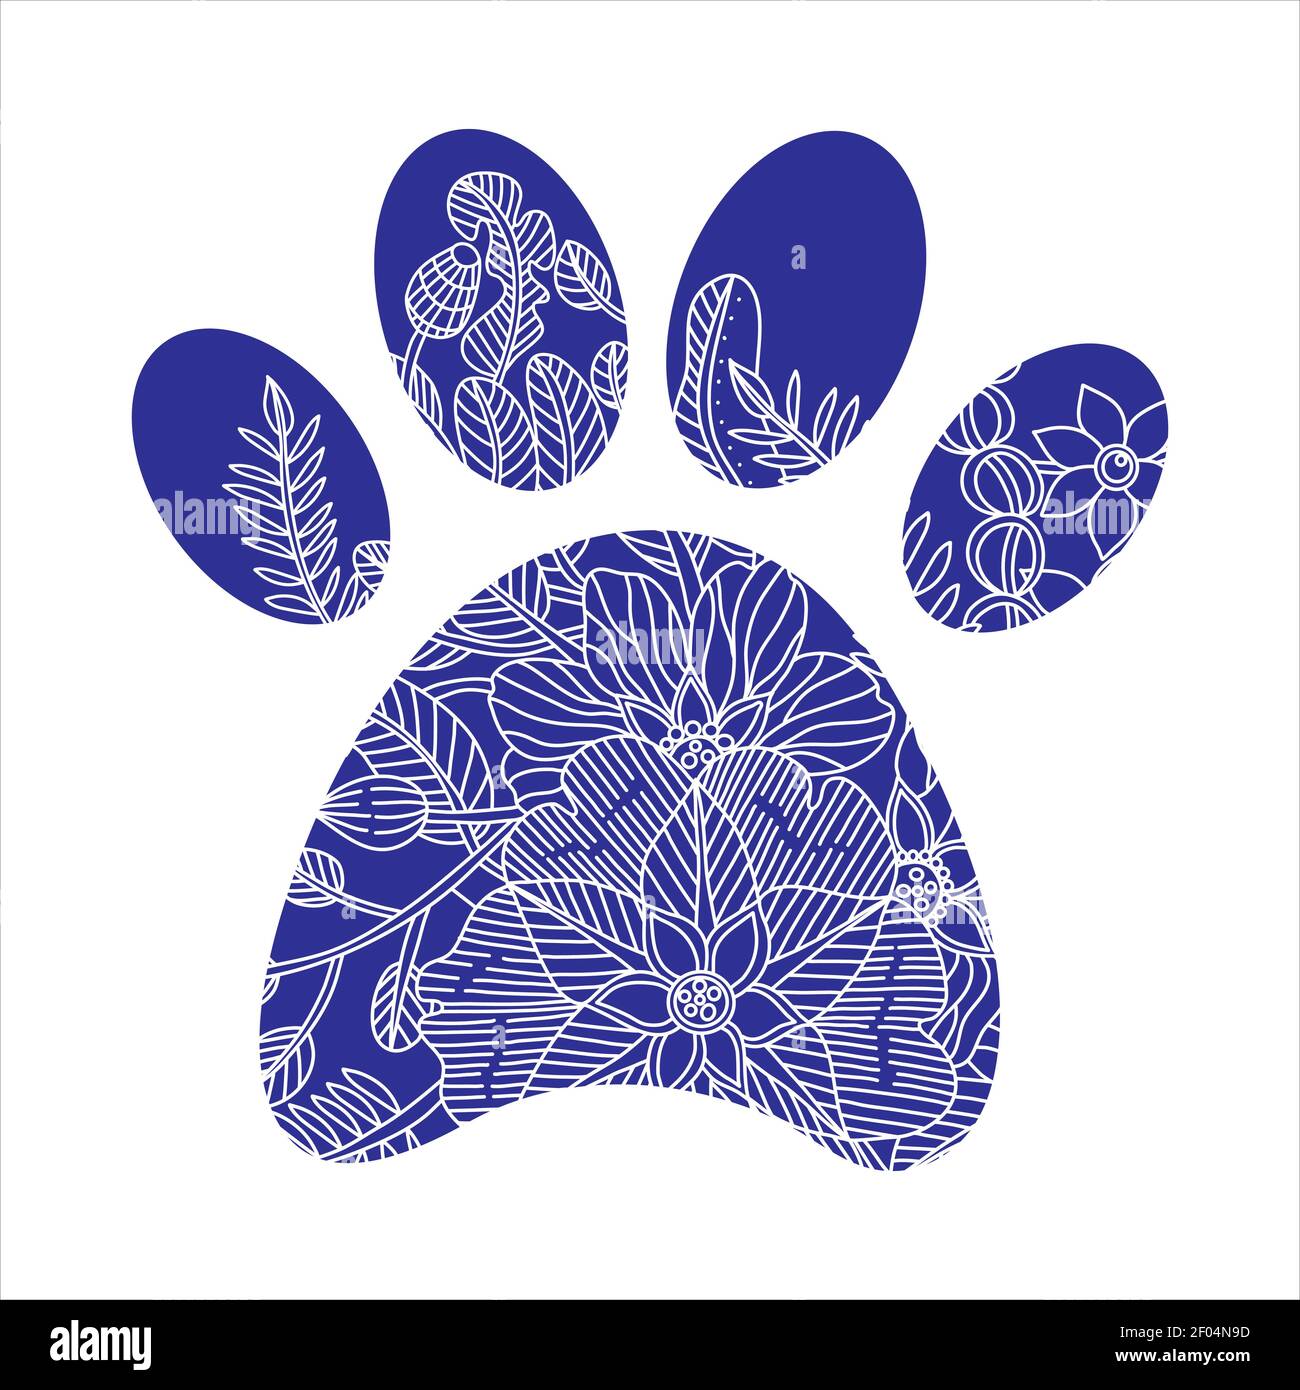 Silhouette of blue dog paws with doodle abstract flowers and leaves. Vector illustration, zentangle concept. Stock Vector